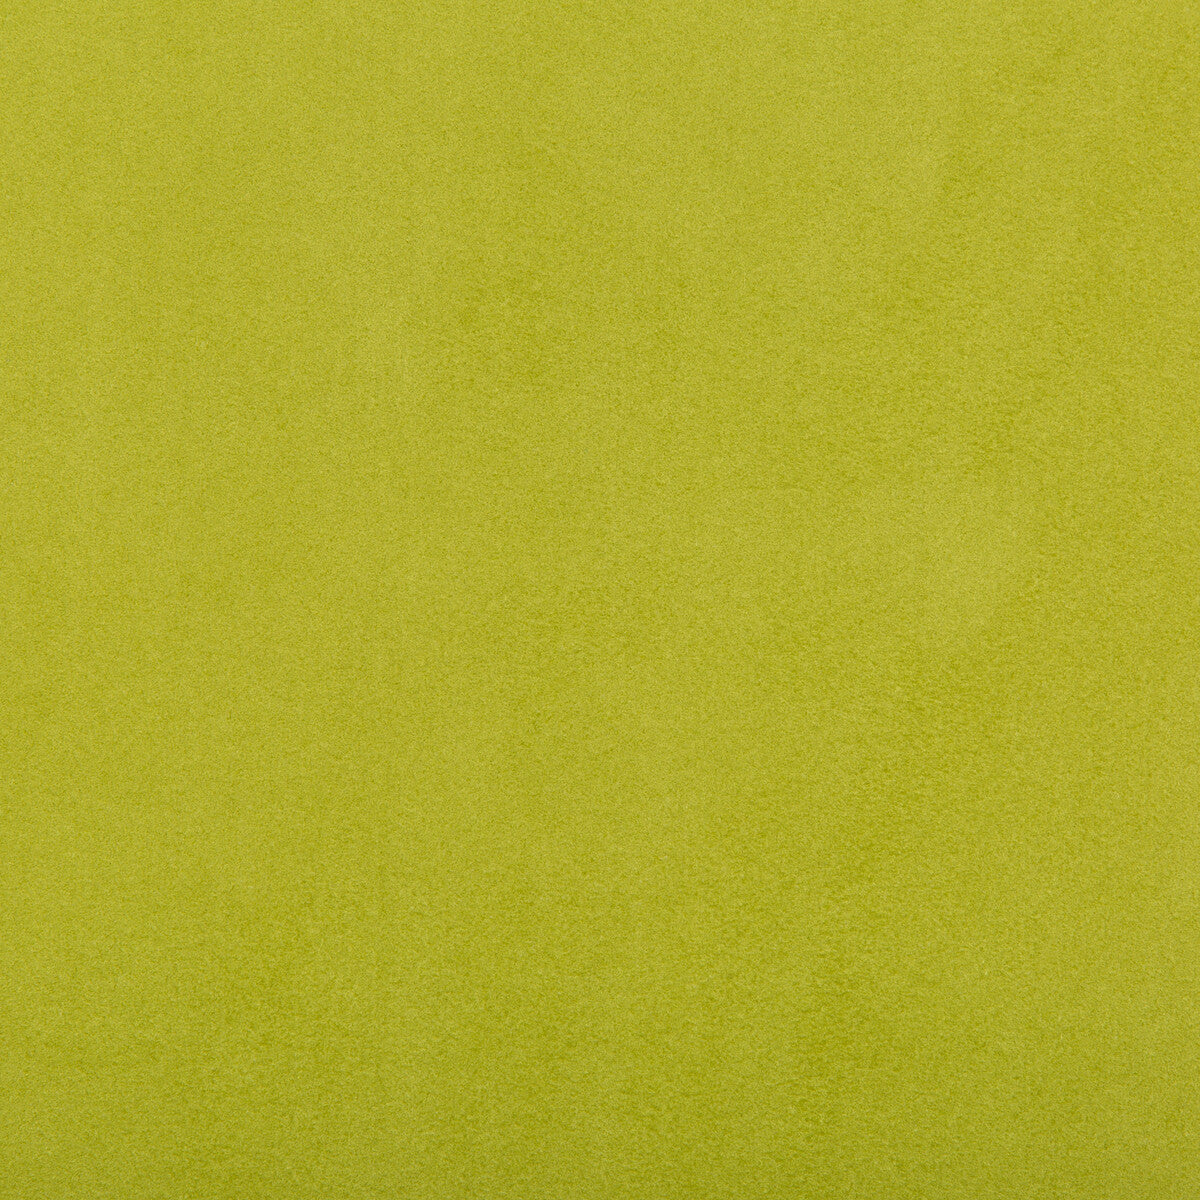 Ultrasuede Green fabric in key lime color - pattern 30787.333.0 - by Kravet Design in the Performance collection